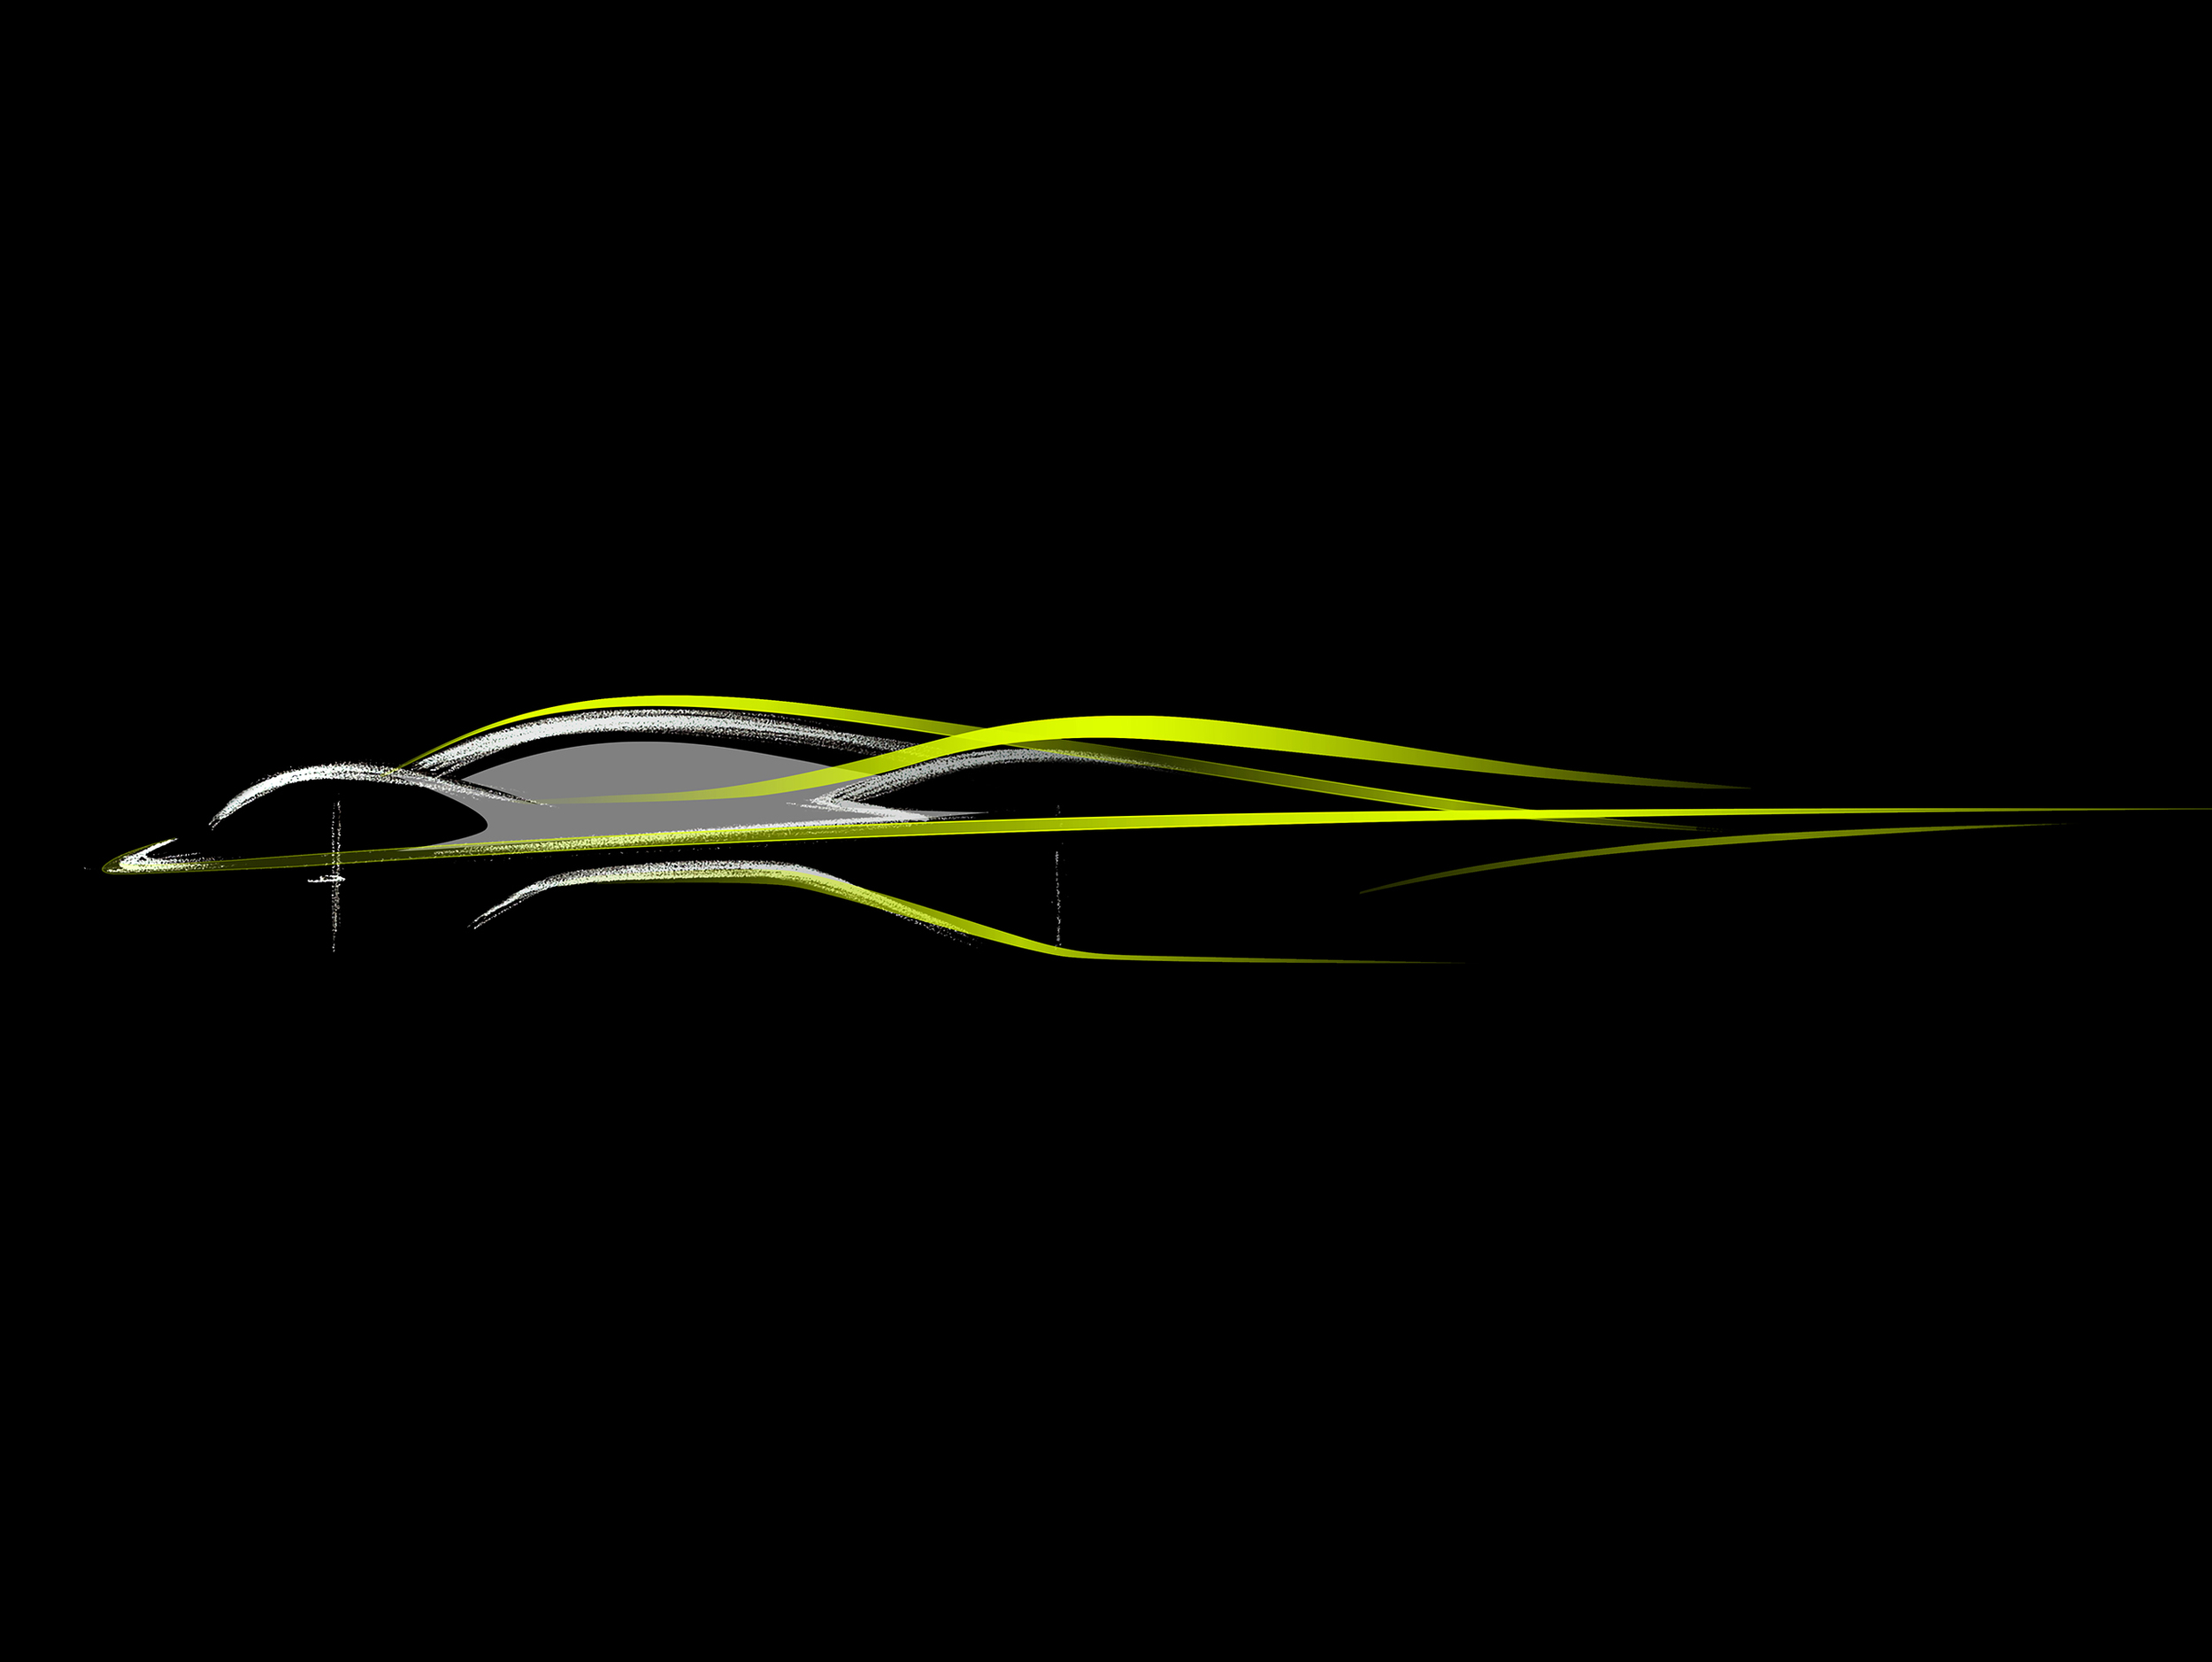 Project AM-RB 001_Sketch_01.jpg